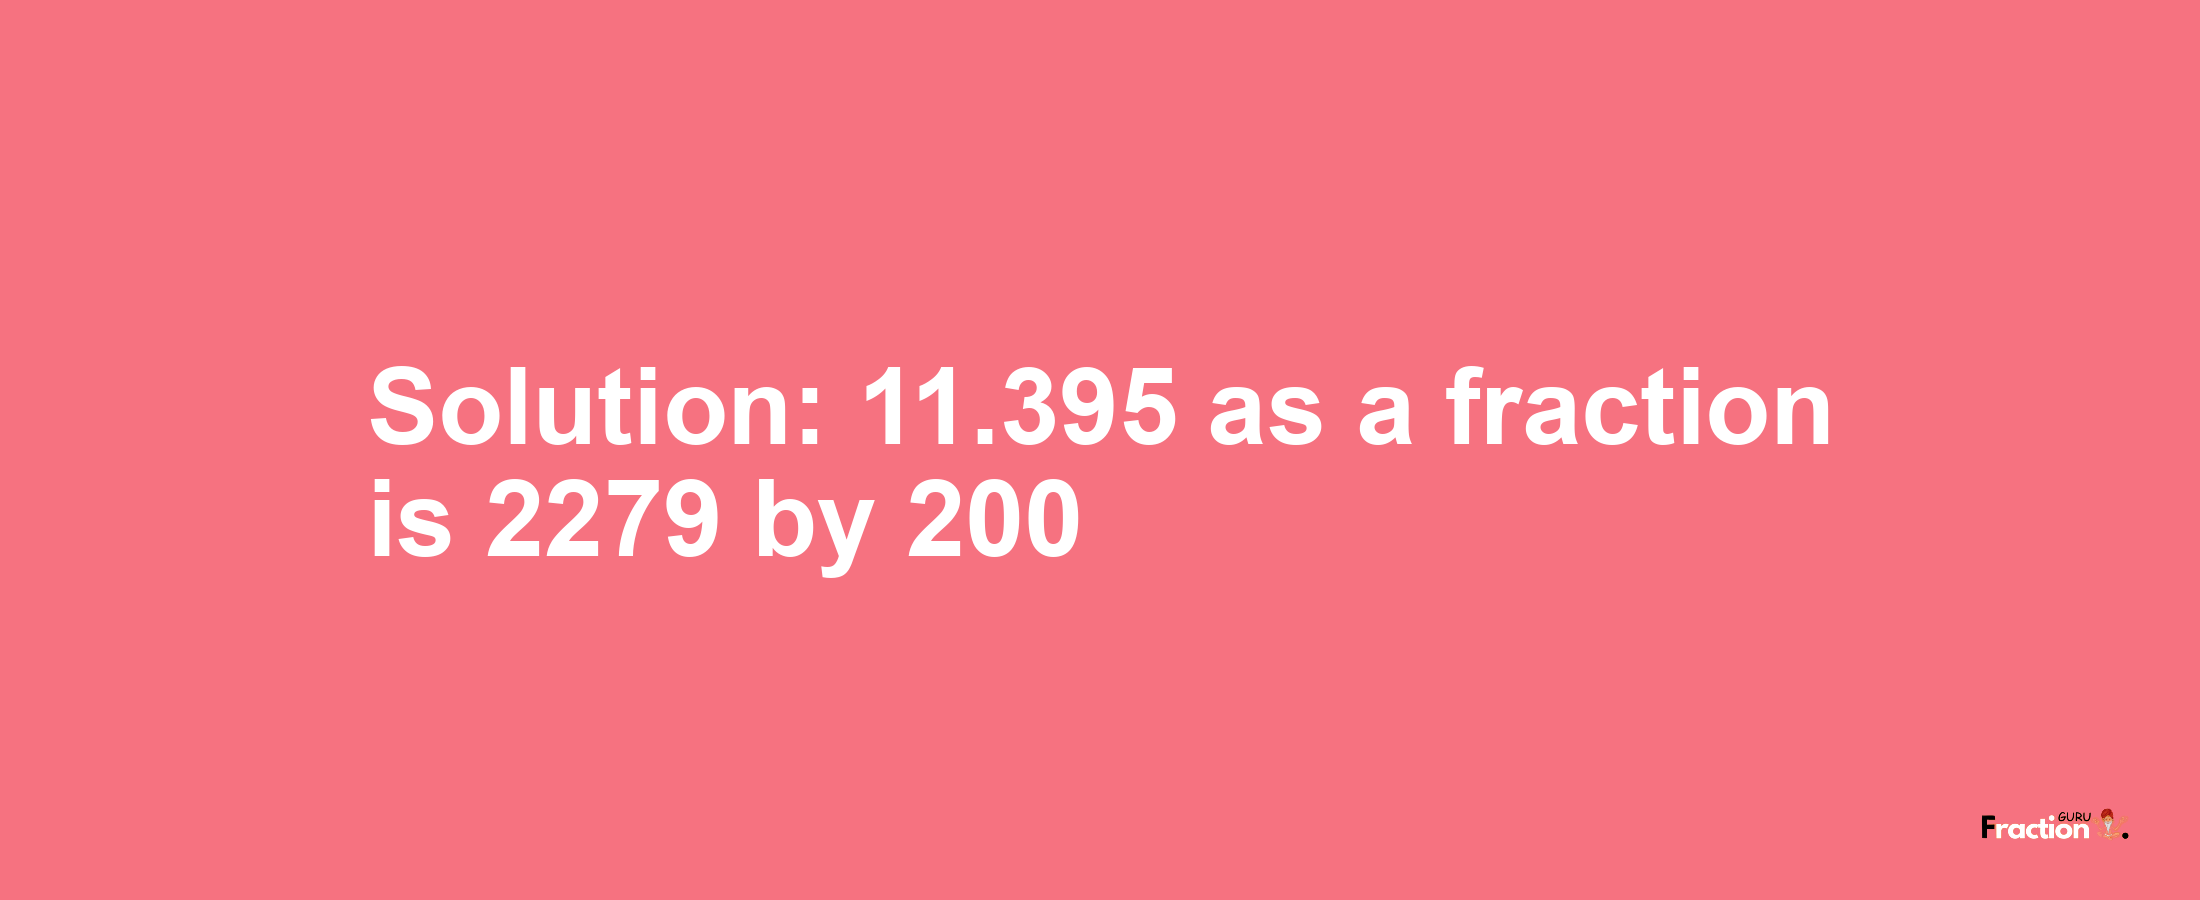 Solution:11.395 as a fraction is 2279/200